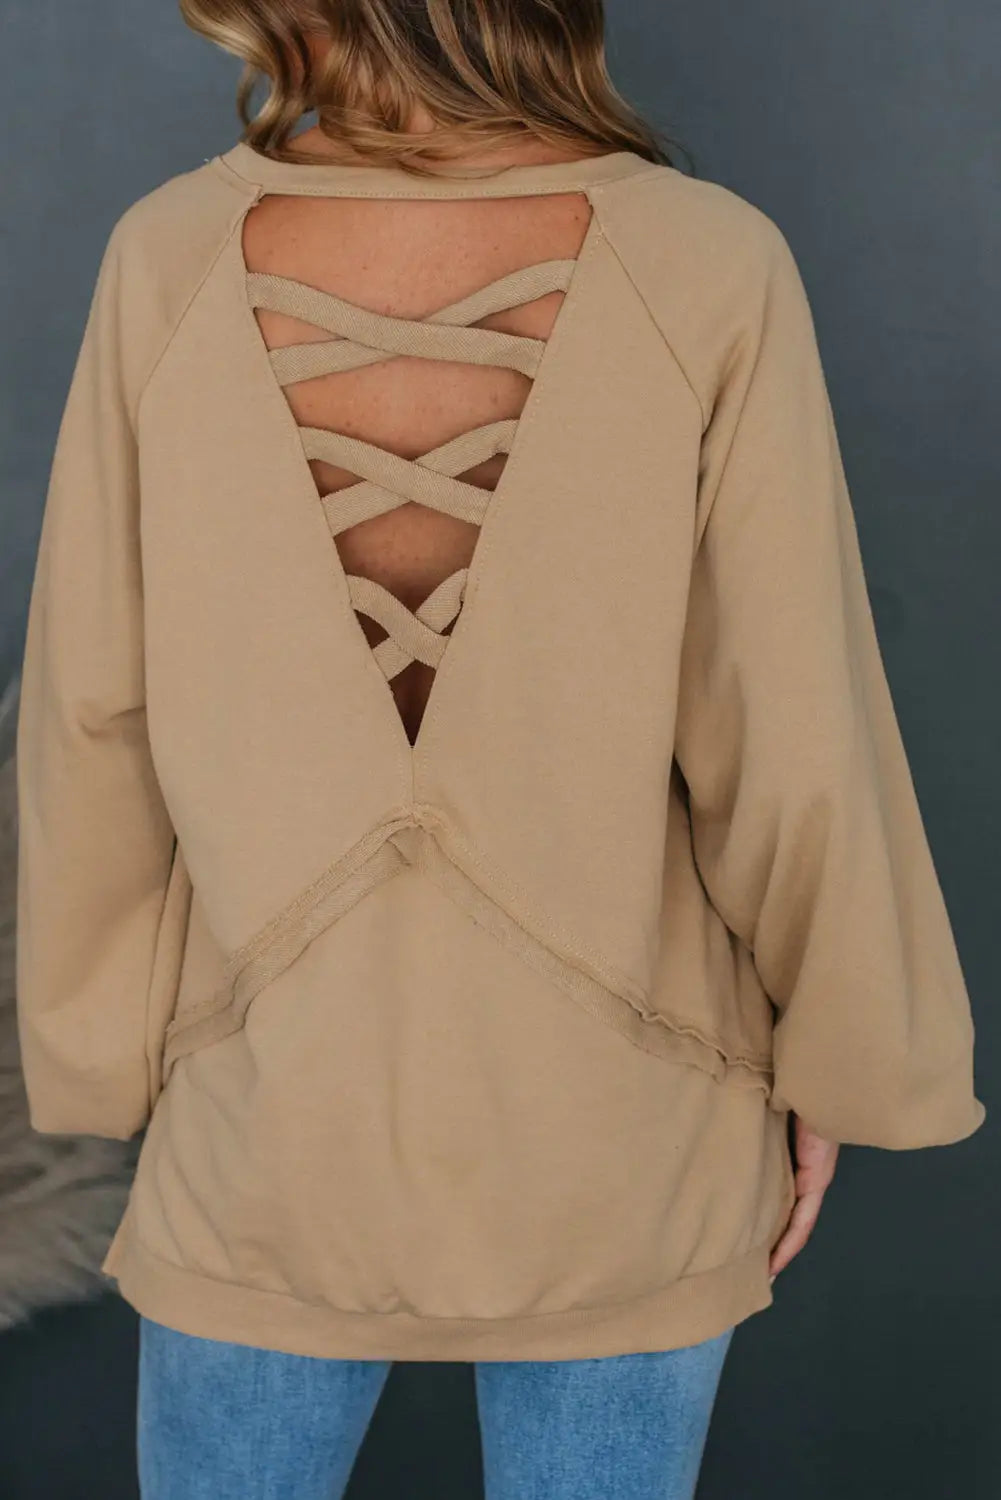 Light french beige solid color lattice hollow out back sweatshirt - l / 65% polyester + 35% cotton - sweatshirts &